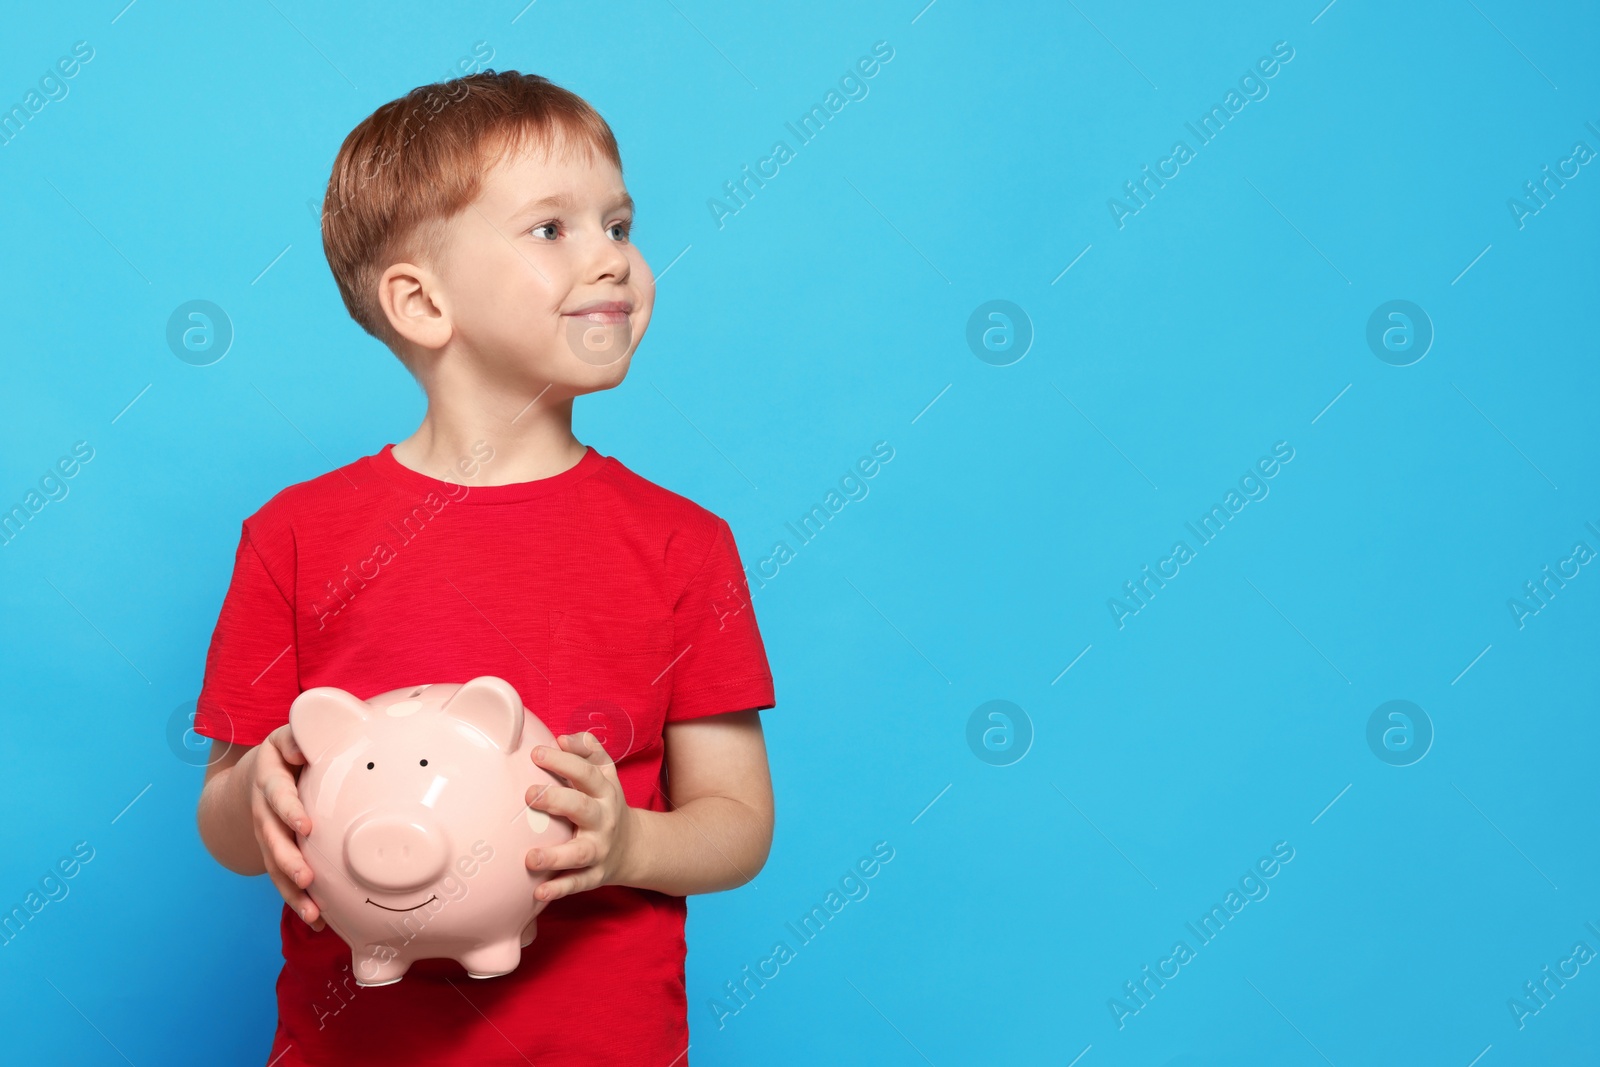 Photo of Cute little boy with ceramic piggy bank on light blue background, space for text